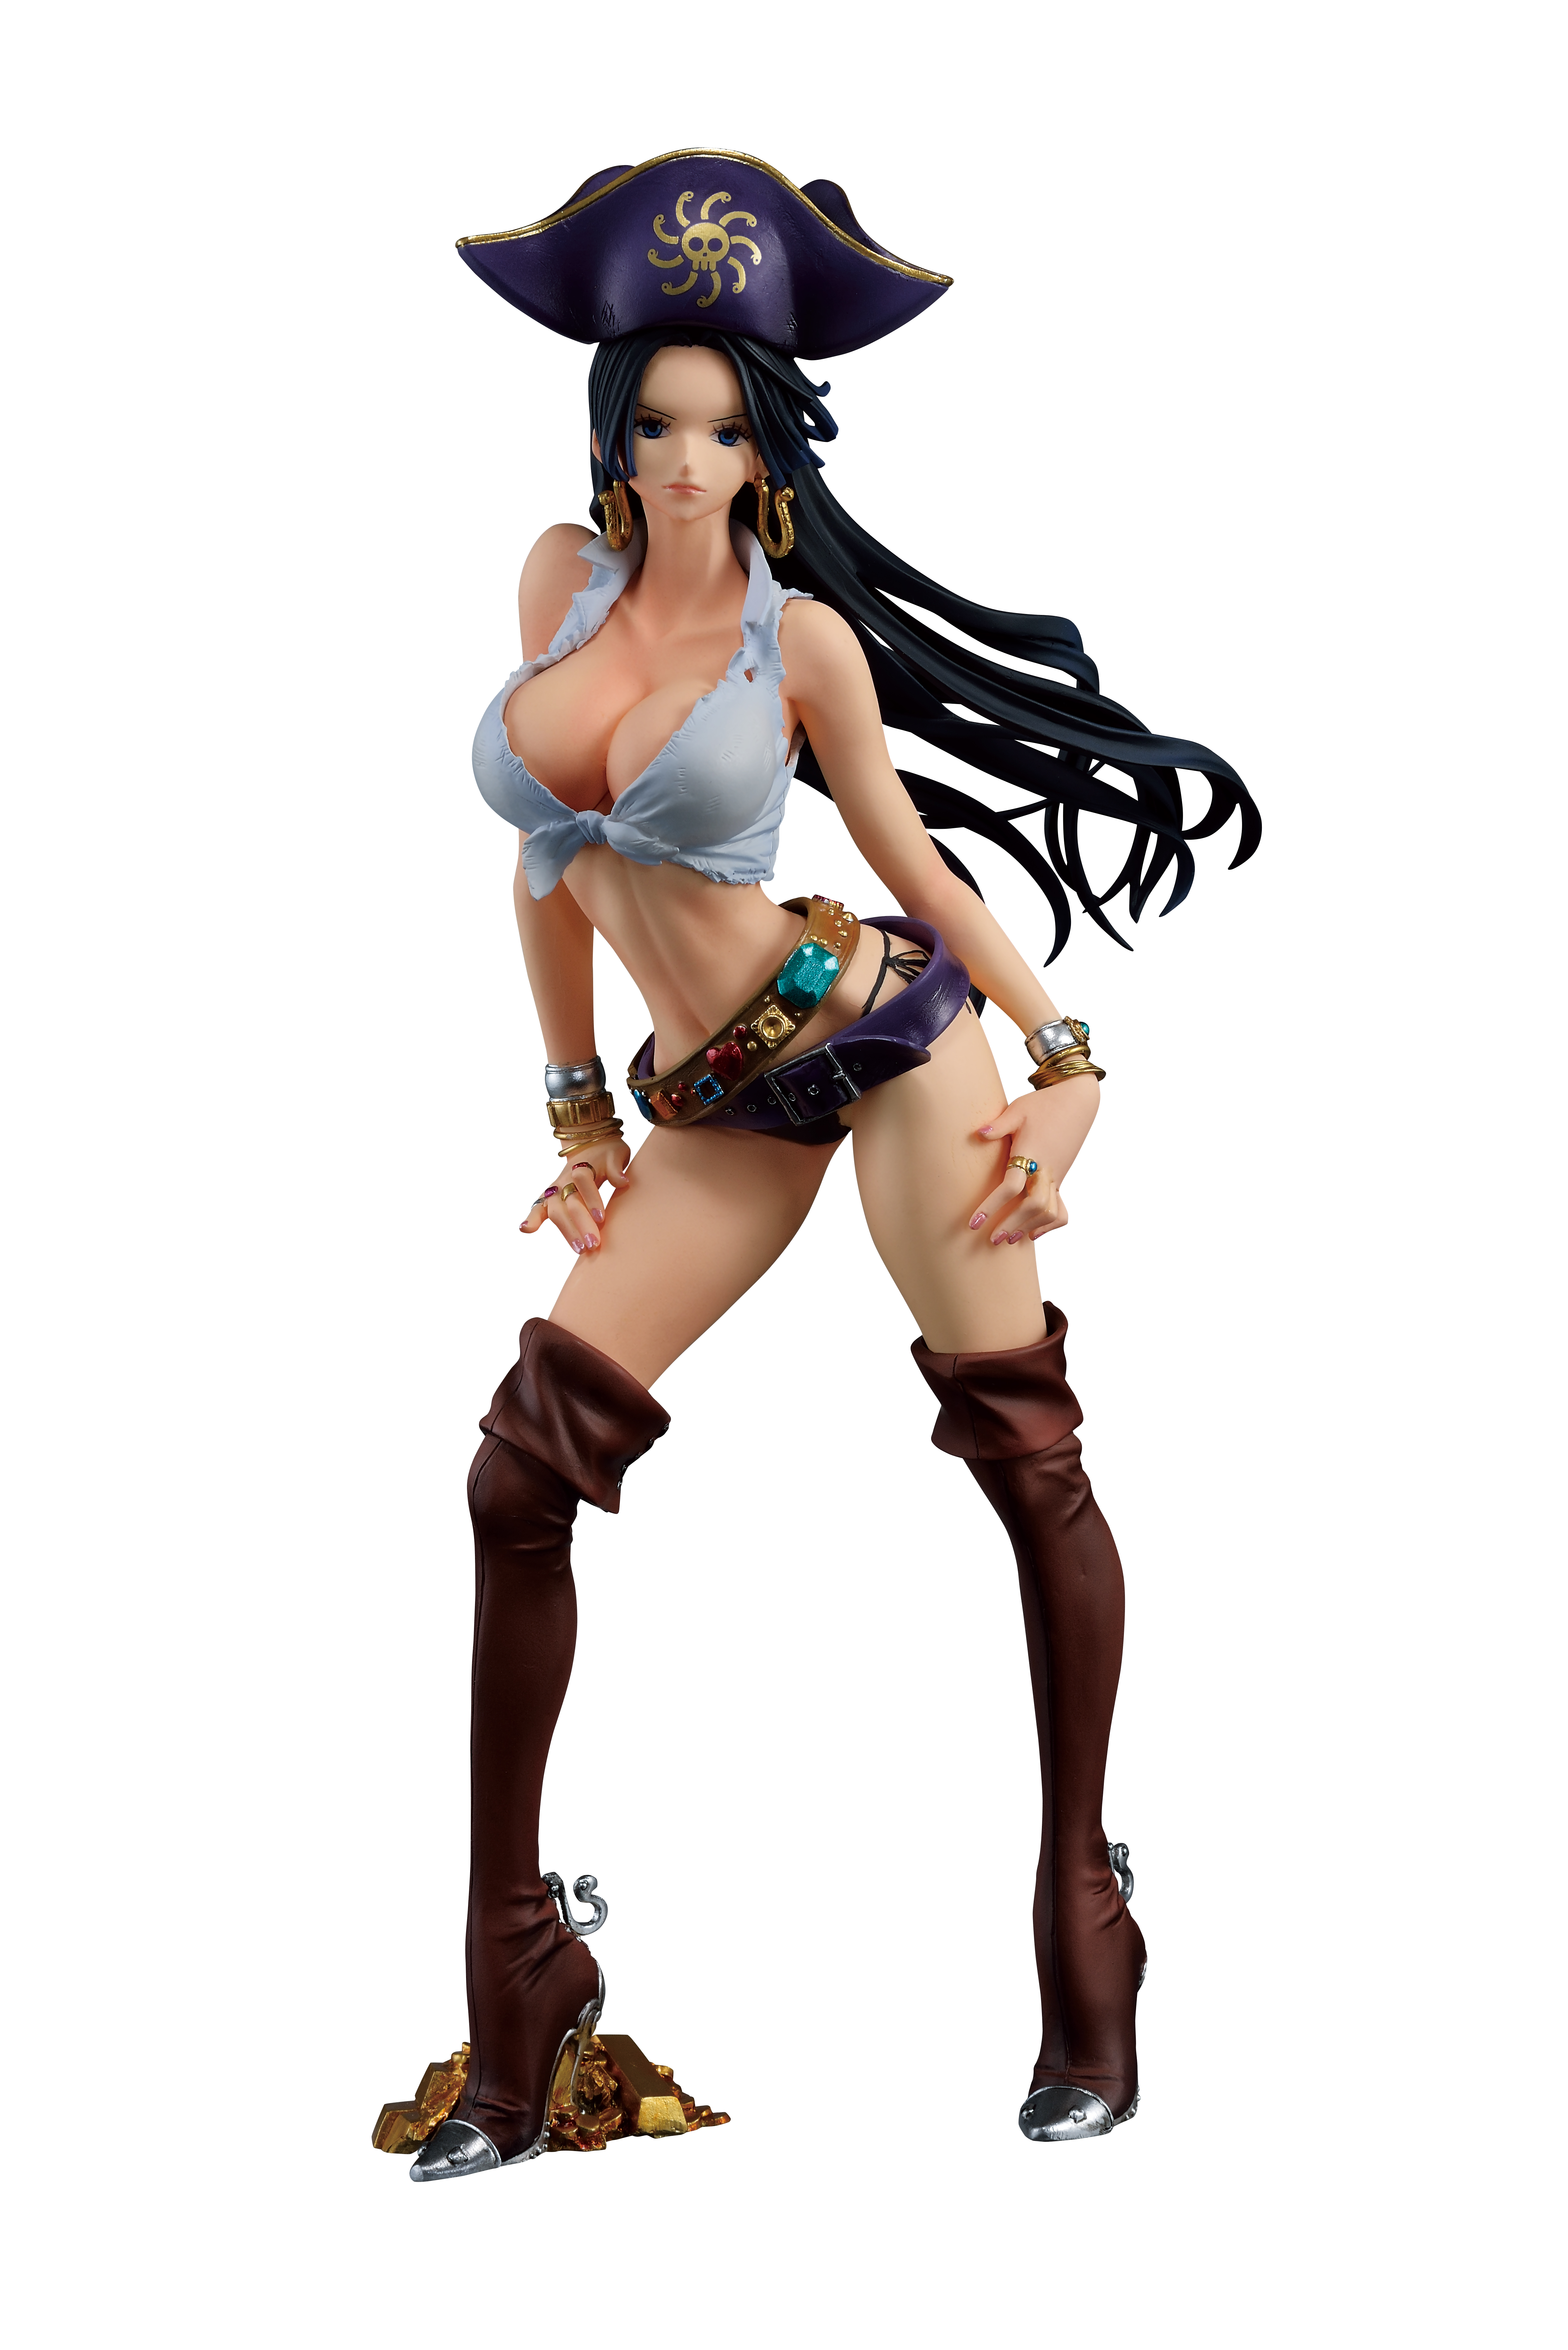 One Piece  Boa hancock white Pirates Action Figure Anime Collectible   Other Hobbies  1740257489